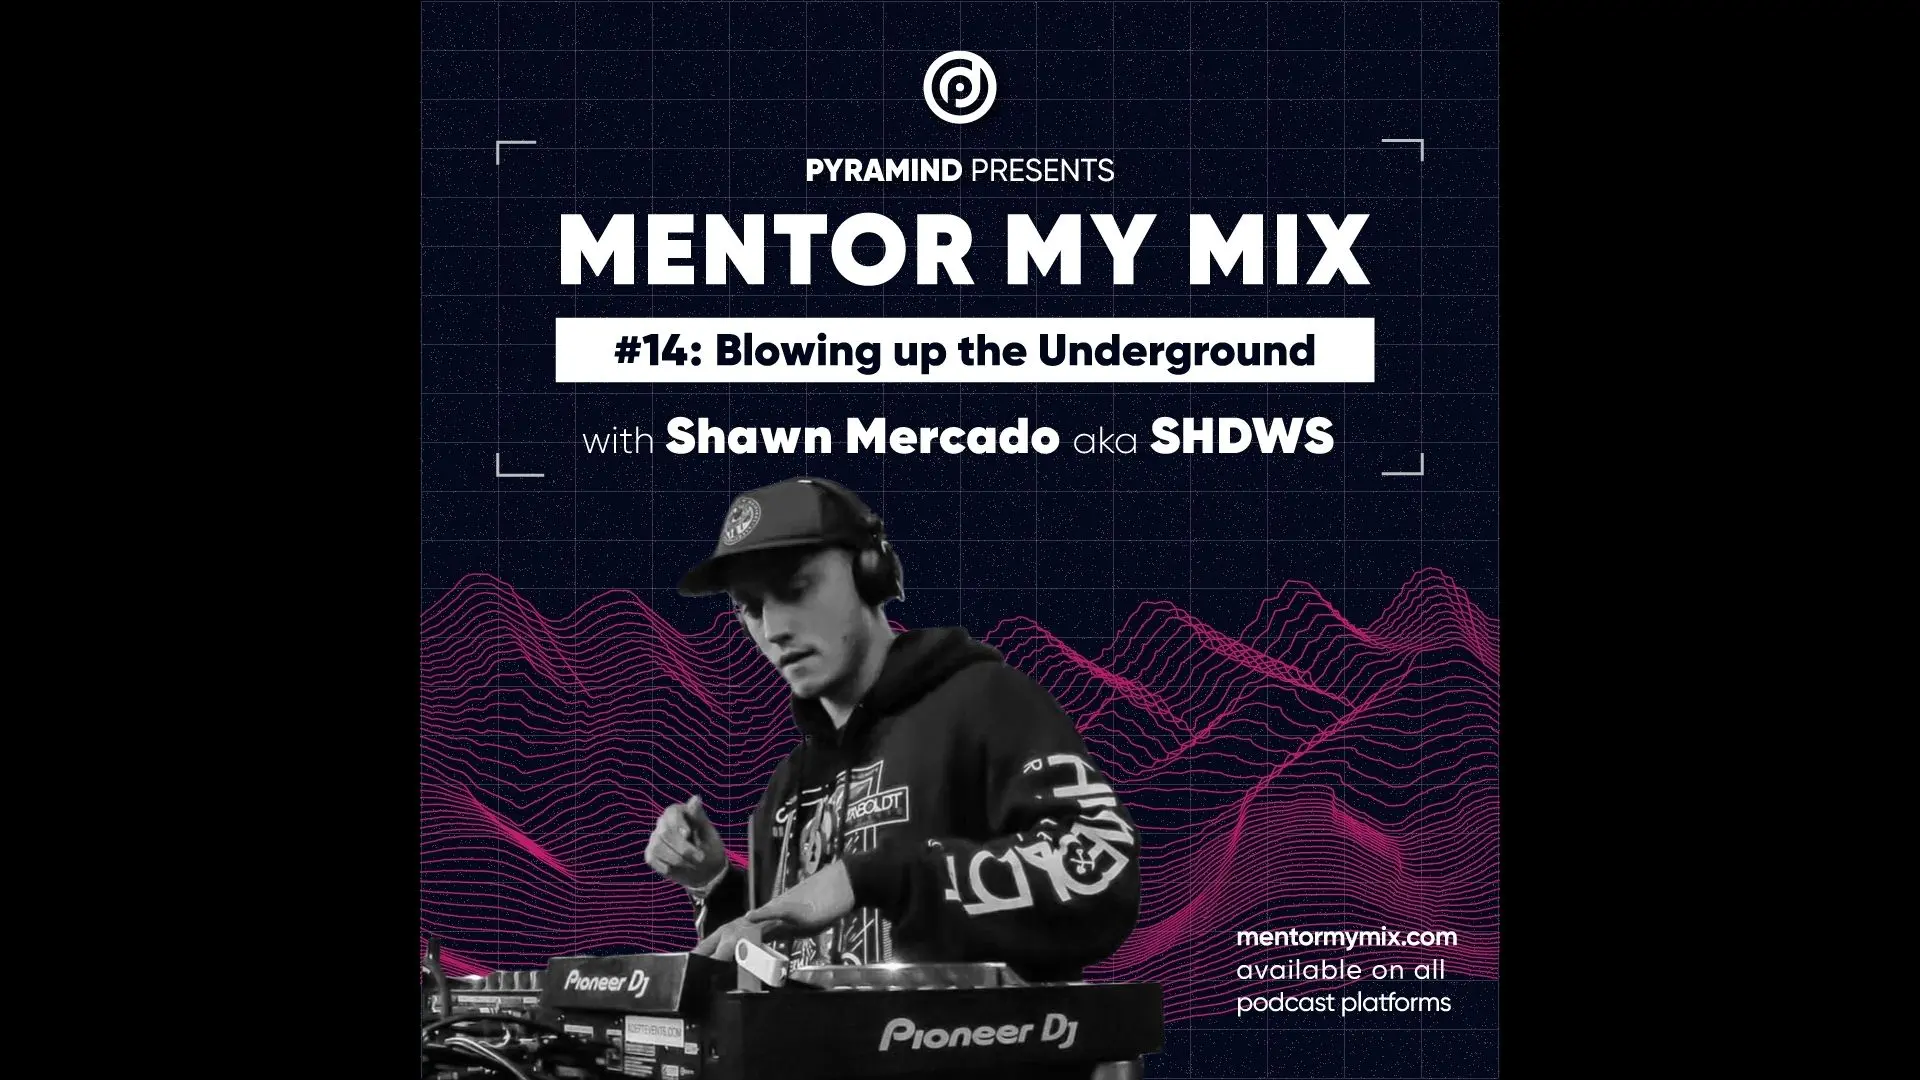 Mentor my mix by Shaun Mercedo, a talented music producer and expert in beatmaking.